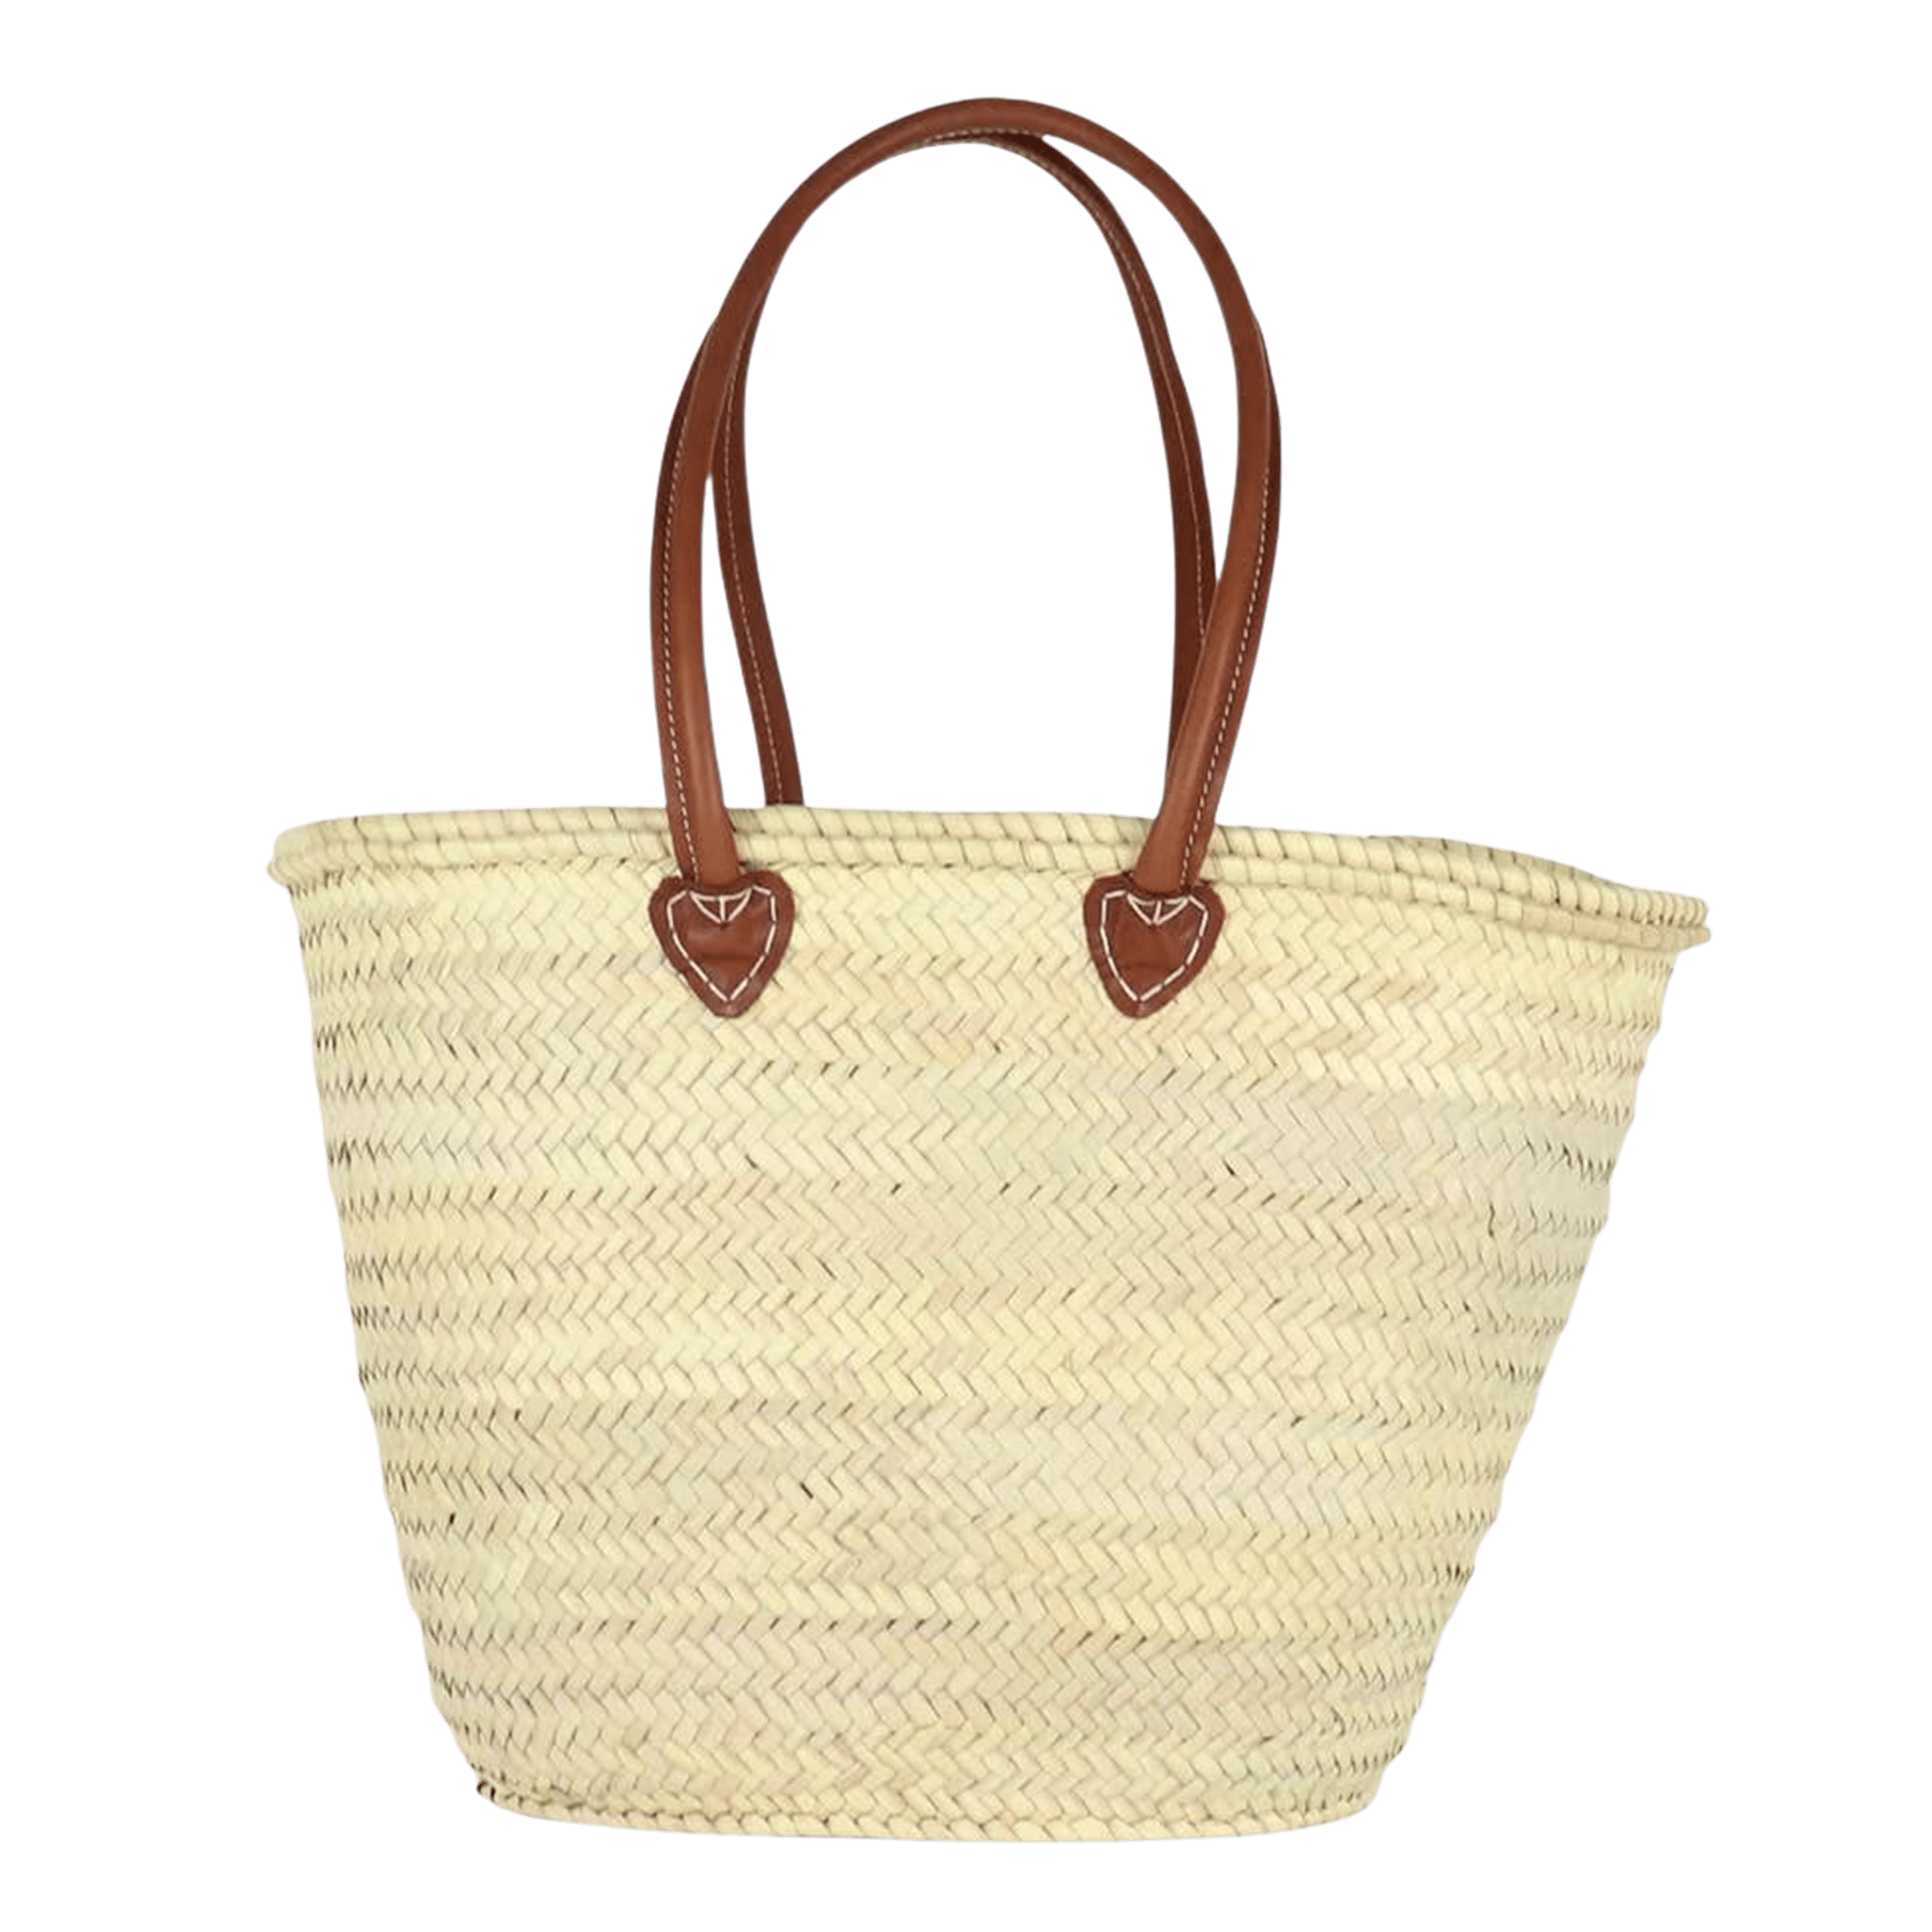 French Market Basket, handmade, leather, linen, one of a kind